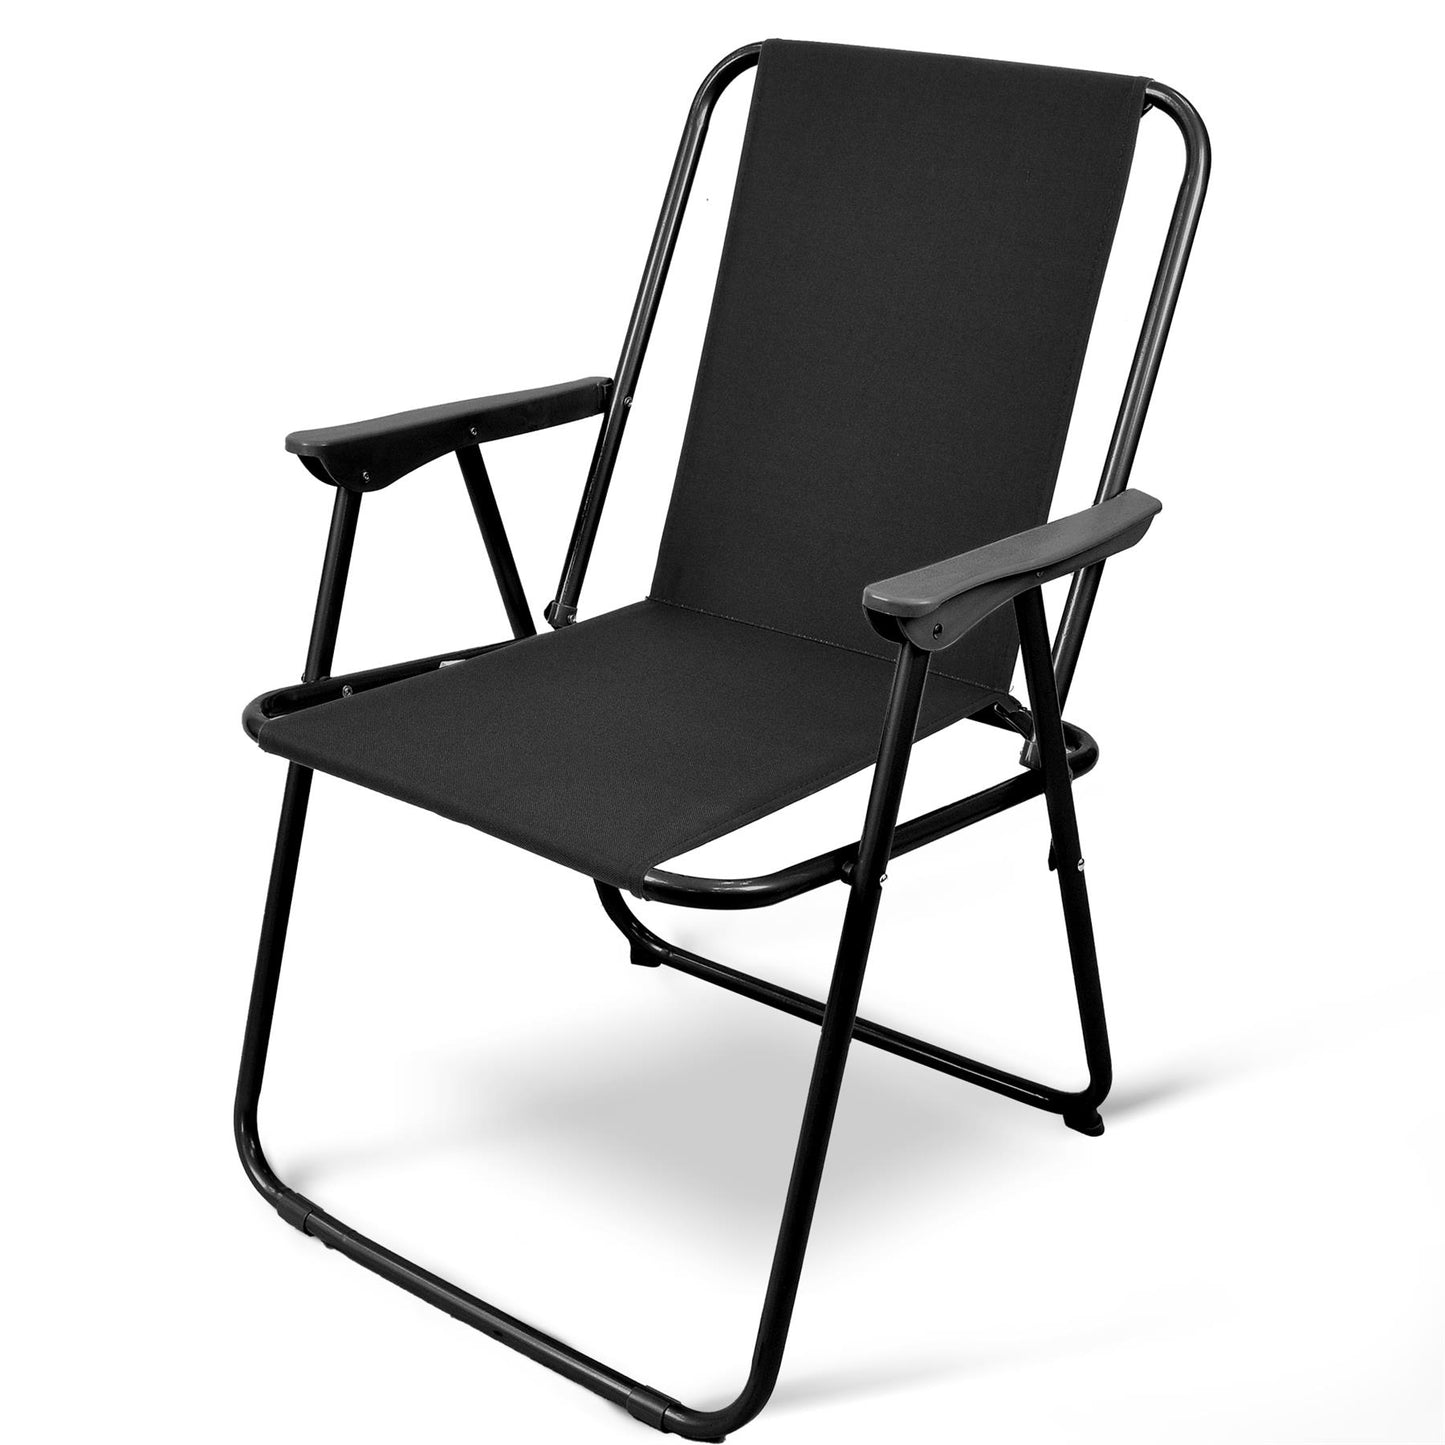 Spring Beach Chair Black Relaxation Outdoors